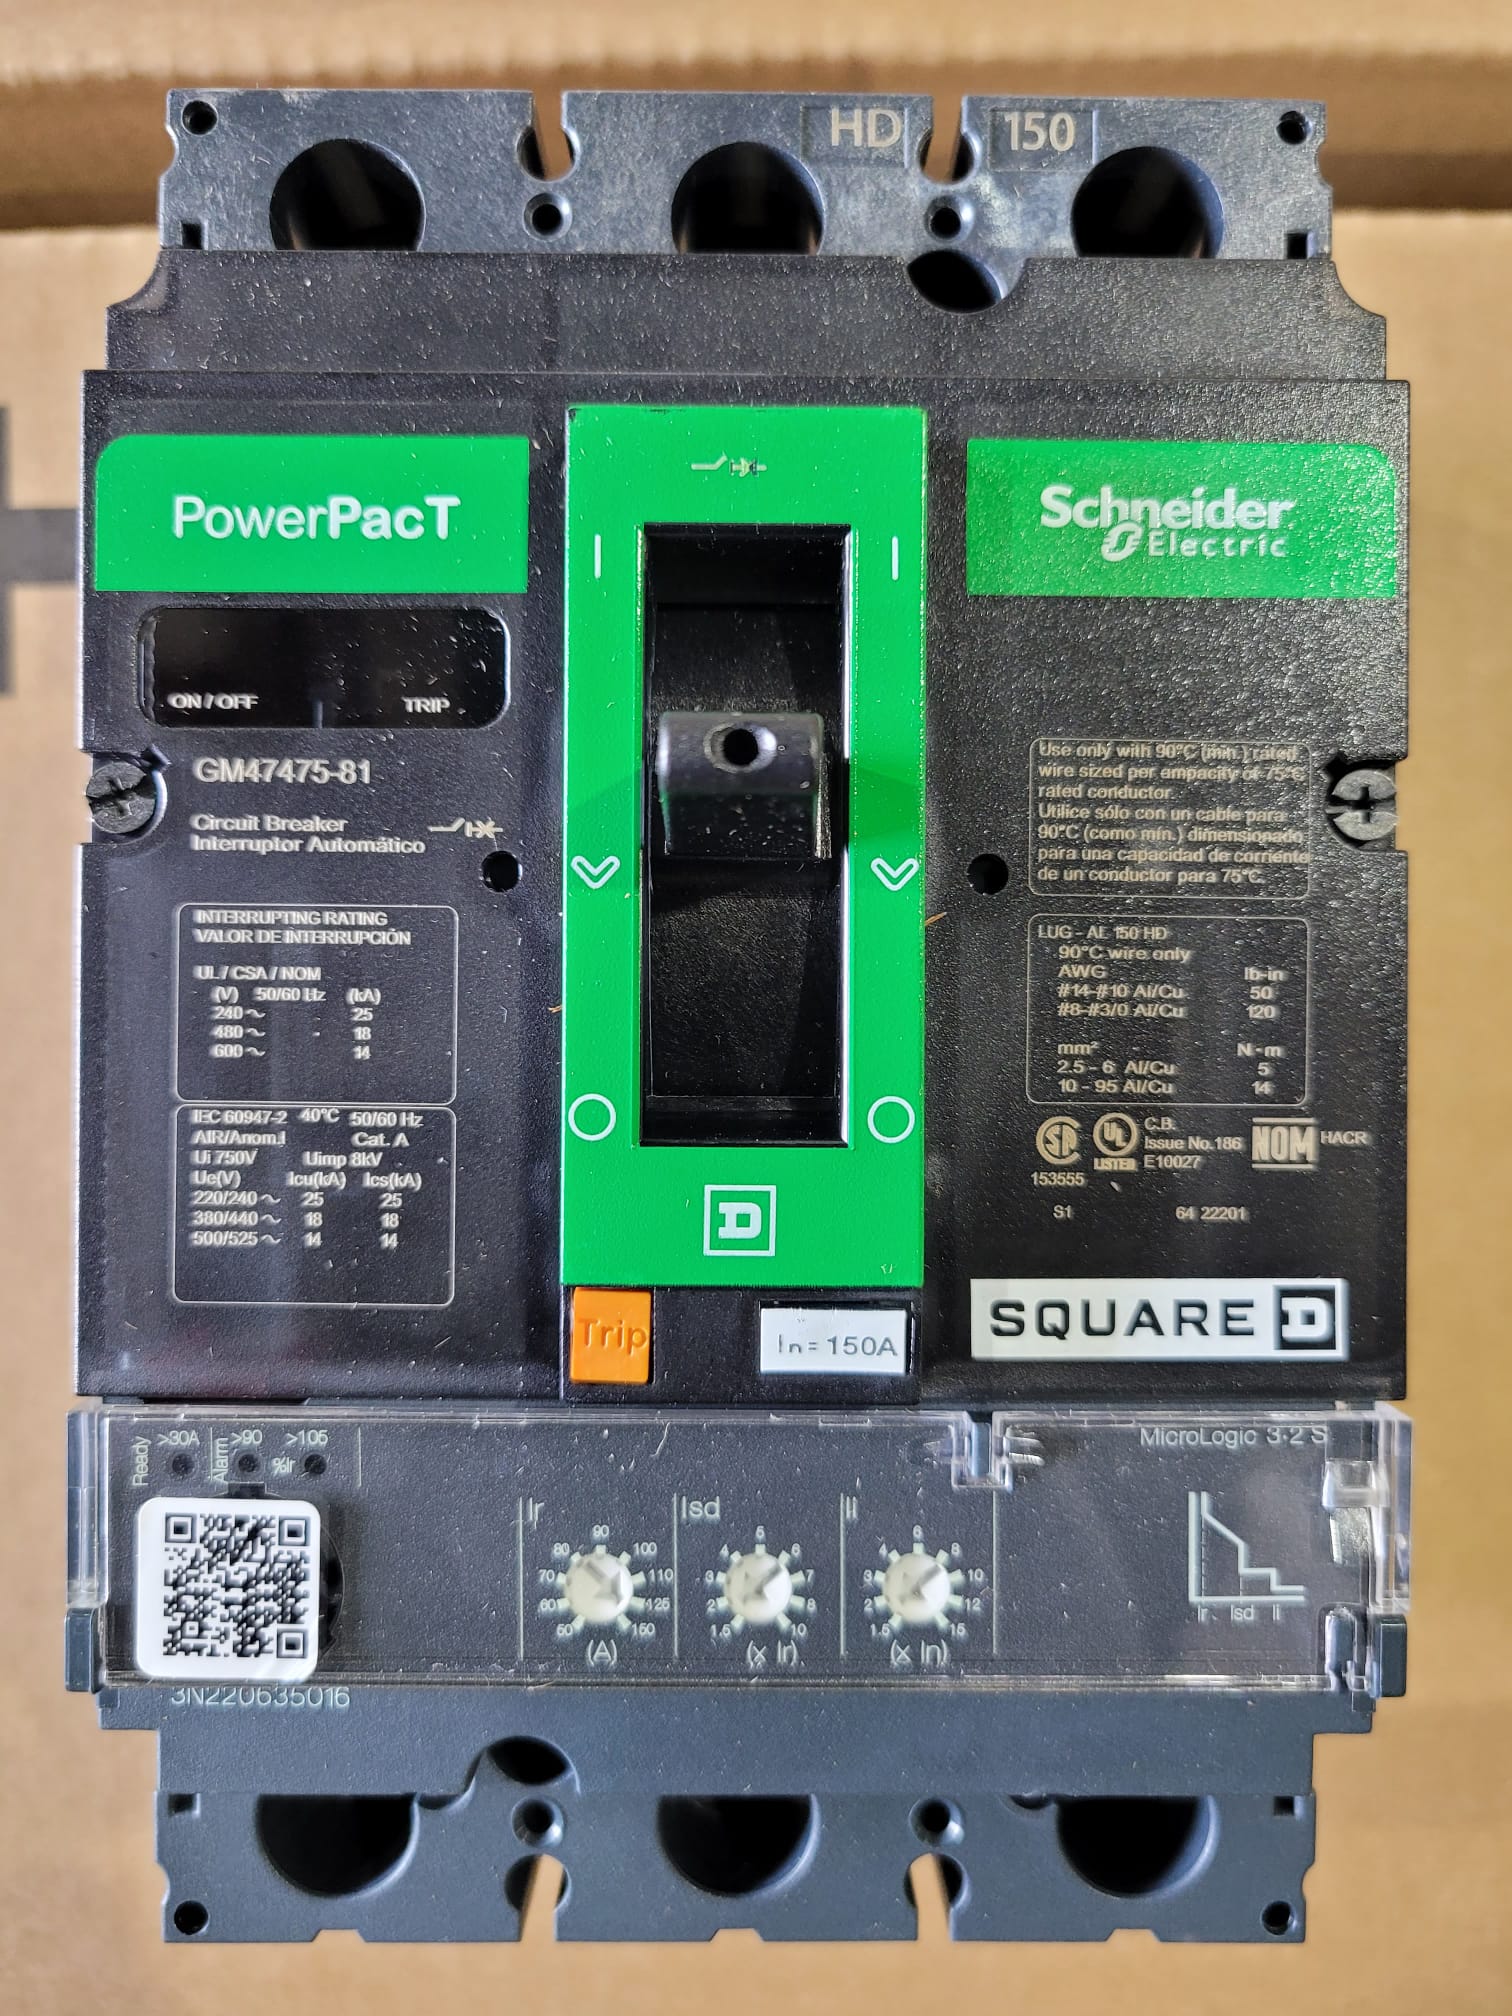 New 150 Amp Square D PowerPacT HDP36150CU33XTX LSI Breaker – 10 Available